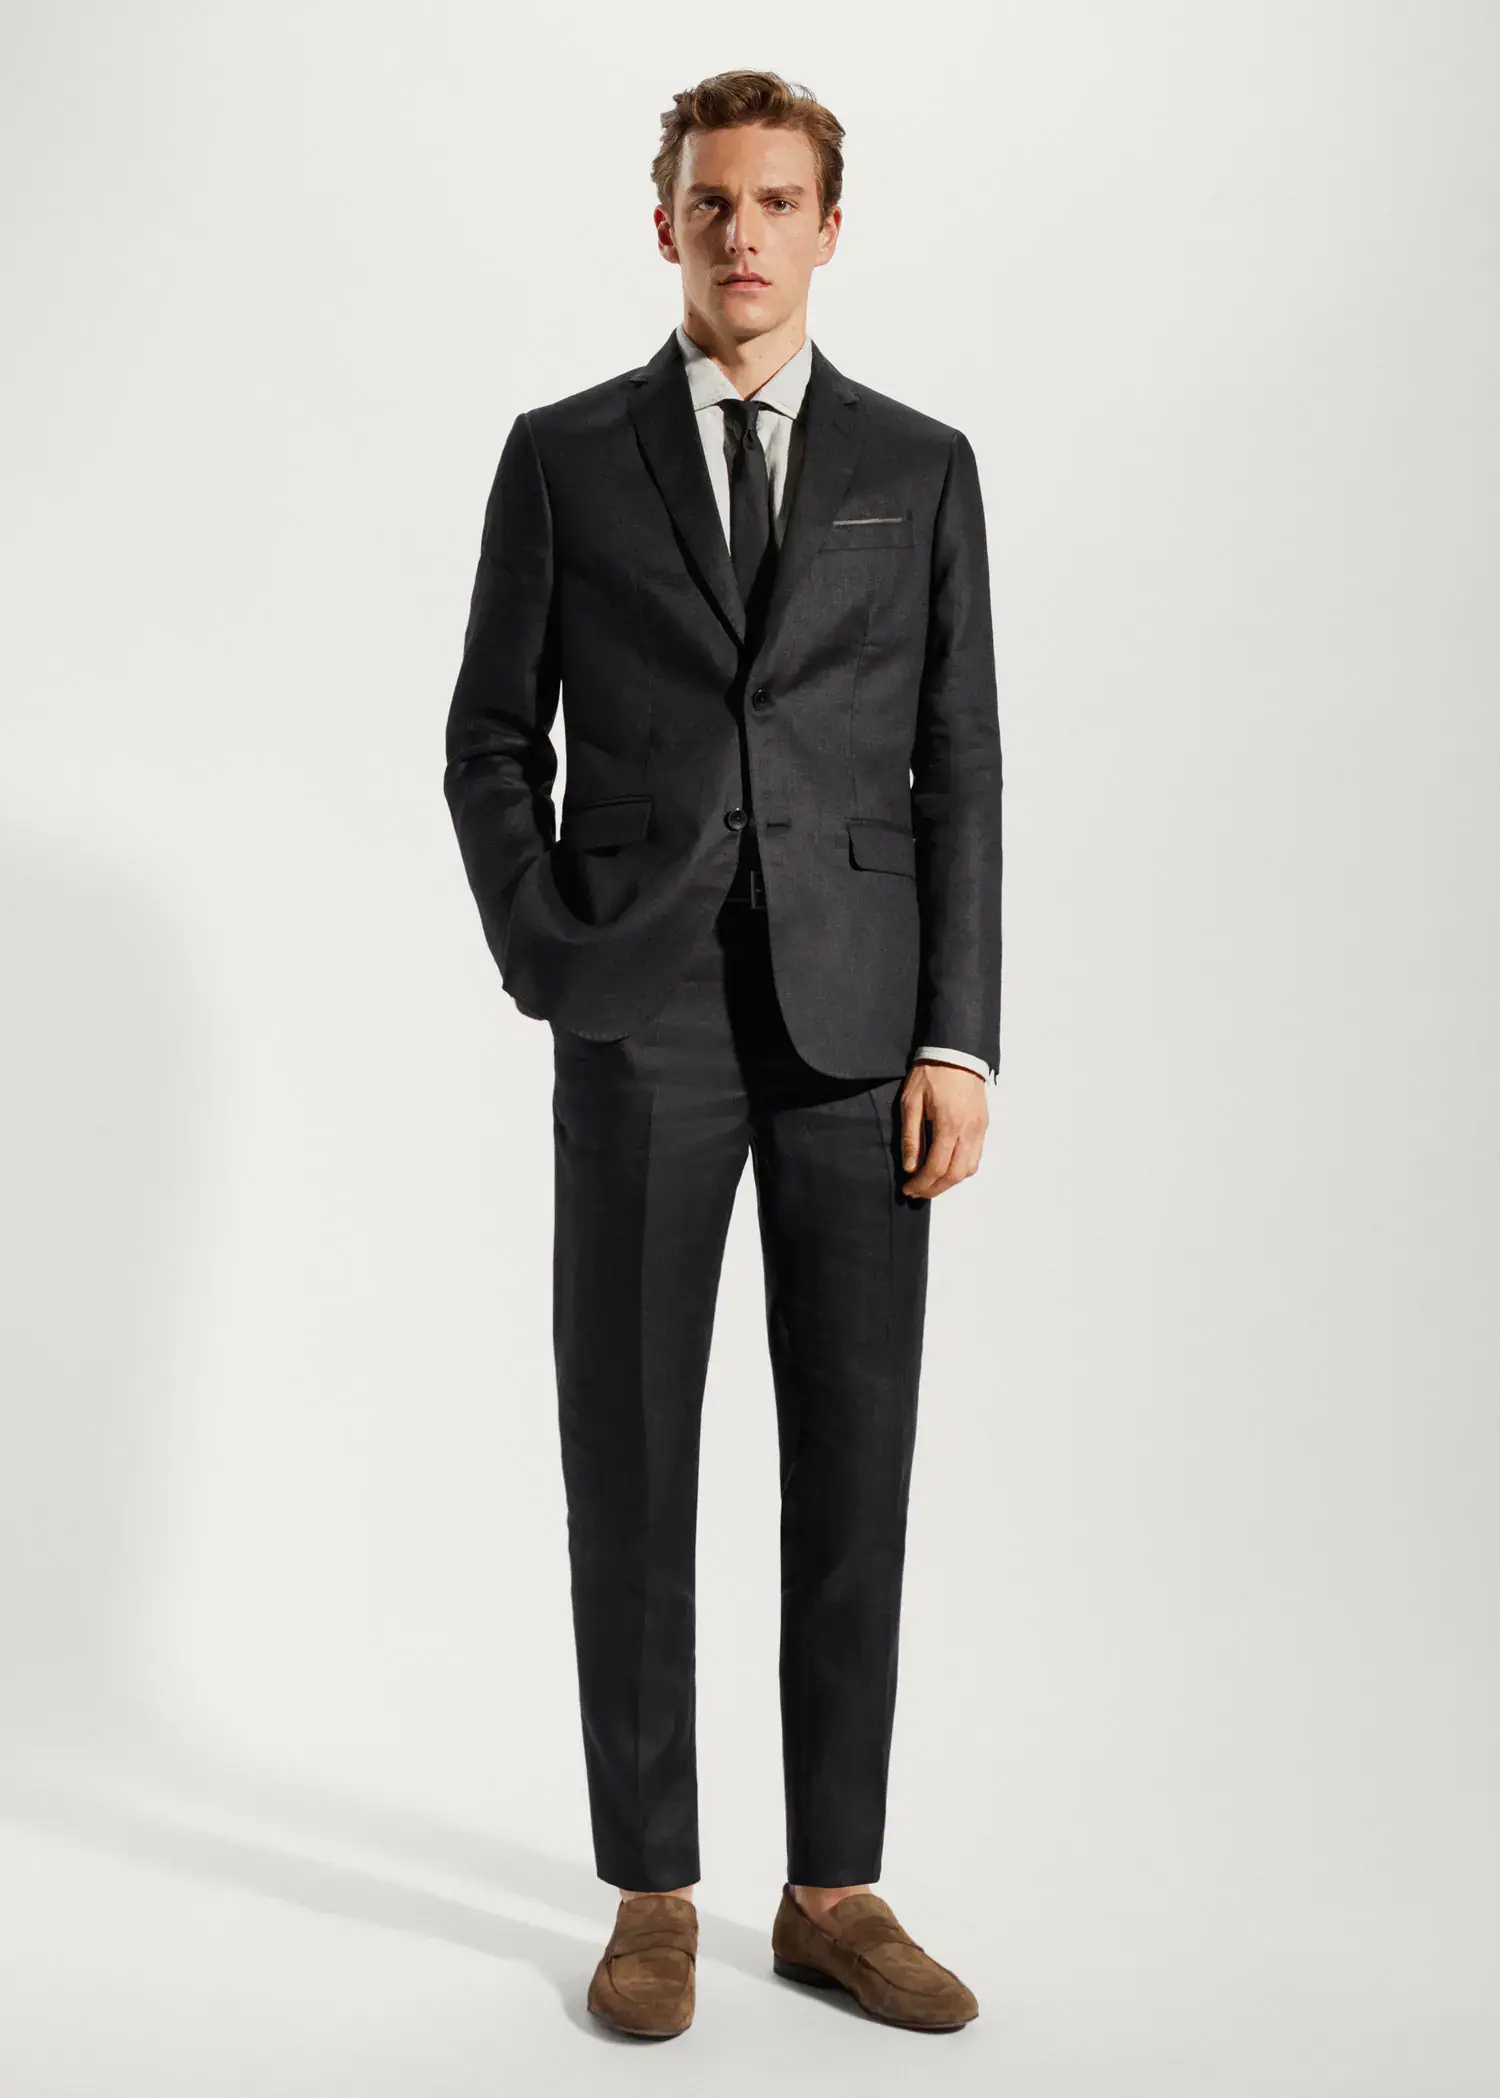 Mango Blazer suit 100% linen. a man in a suit and tie standing in front of a white wall. 